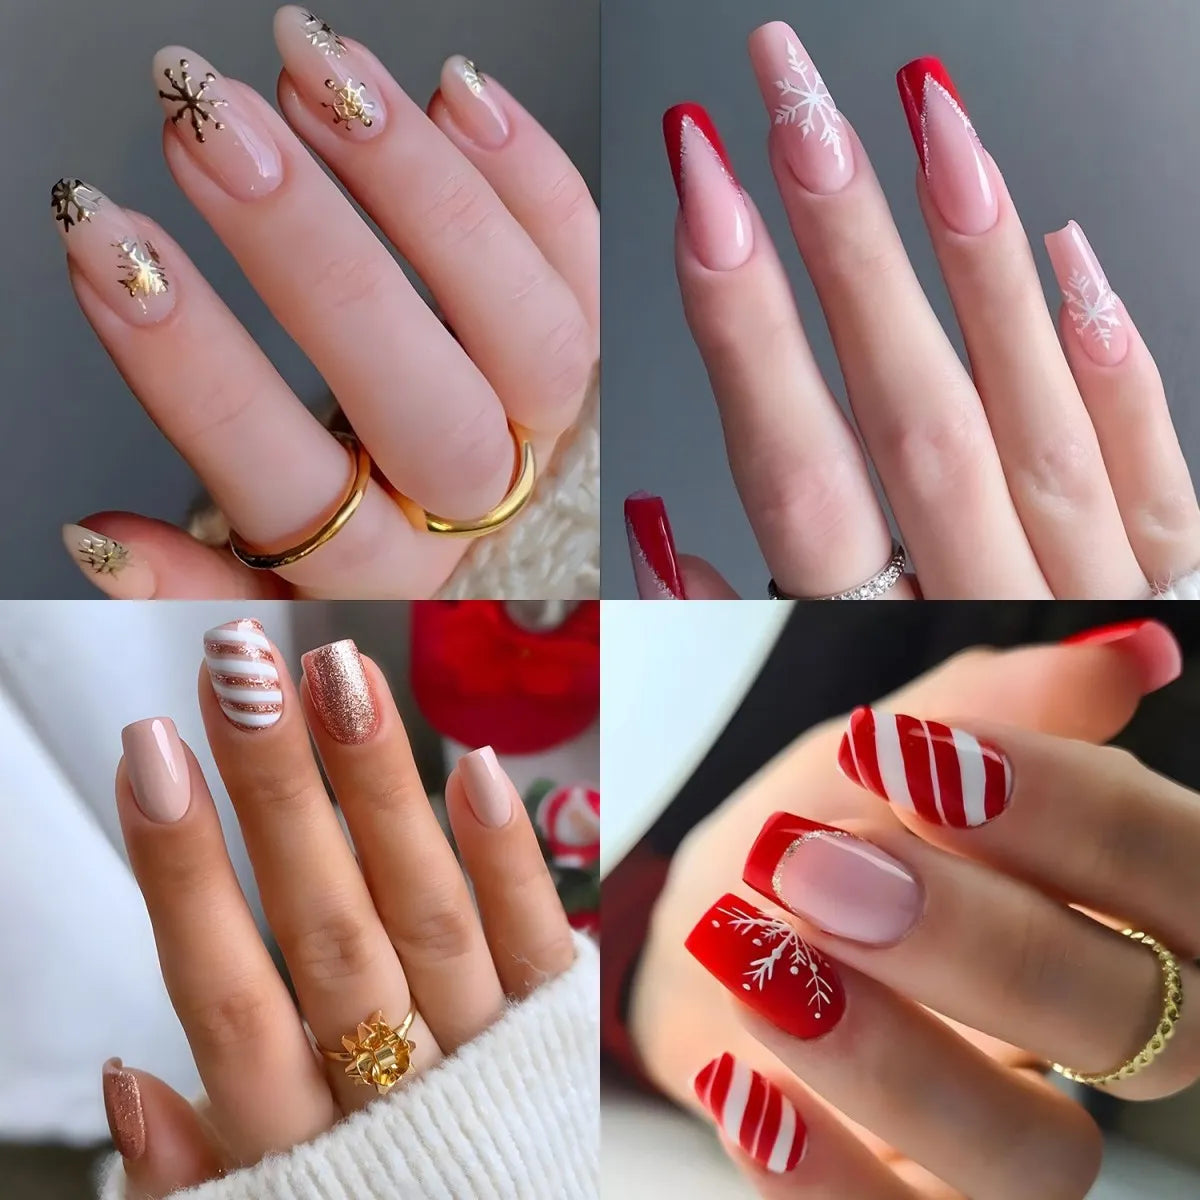 24Pcs Christmas Exclusive False Nails Wearable Xmas Style Fake Nails Checked Snowflake Design Full Cover Press on Manicure Tips*